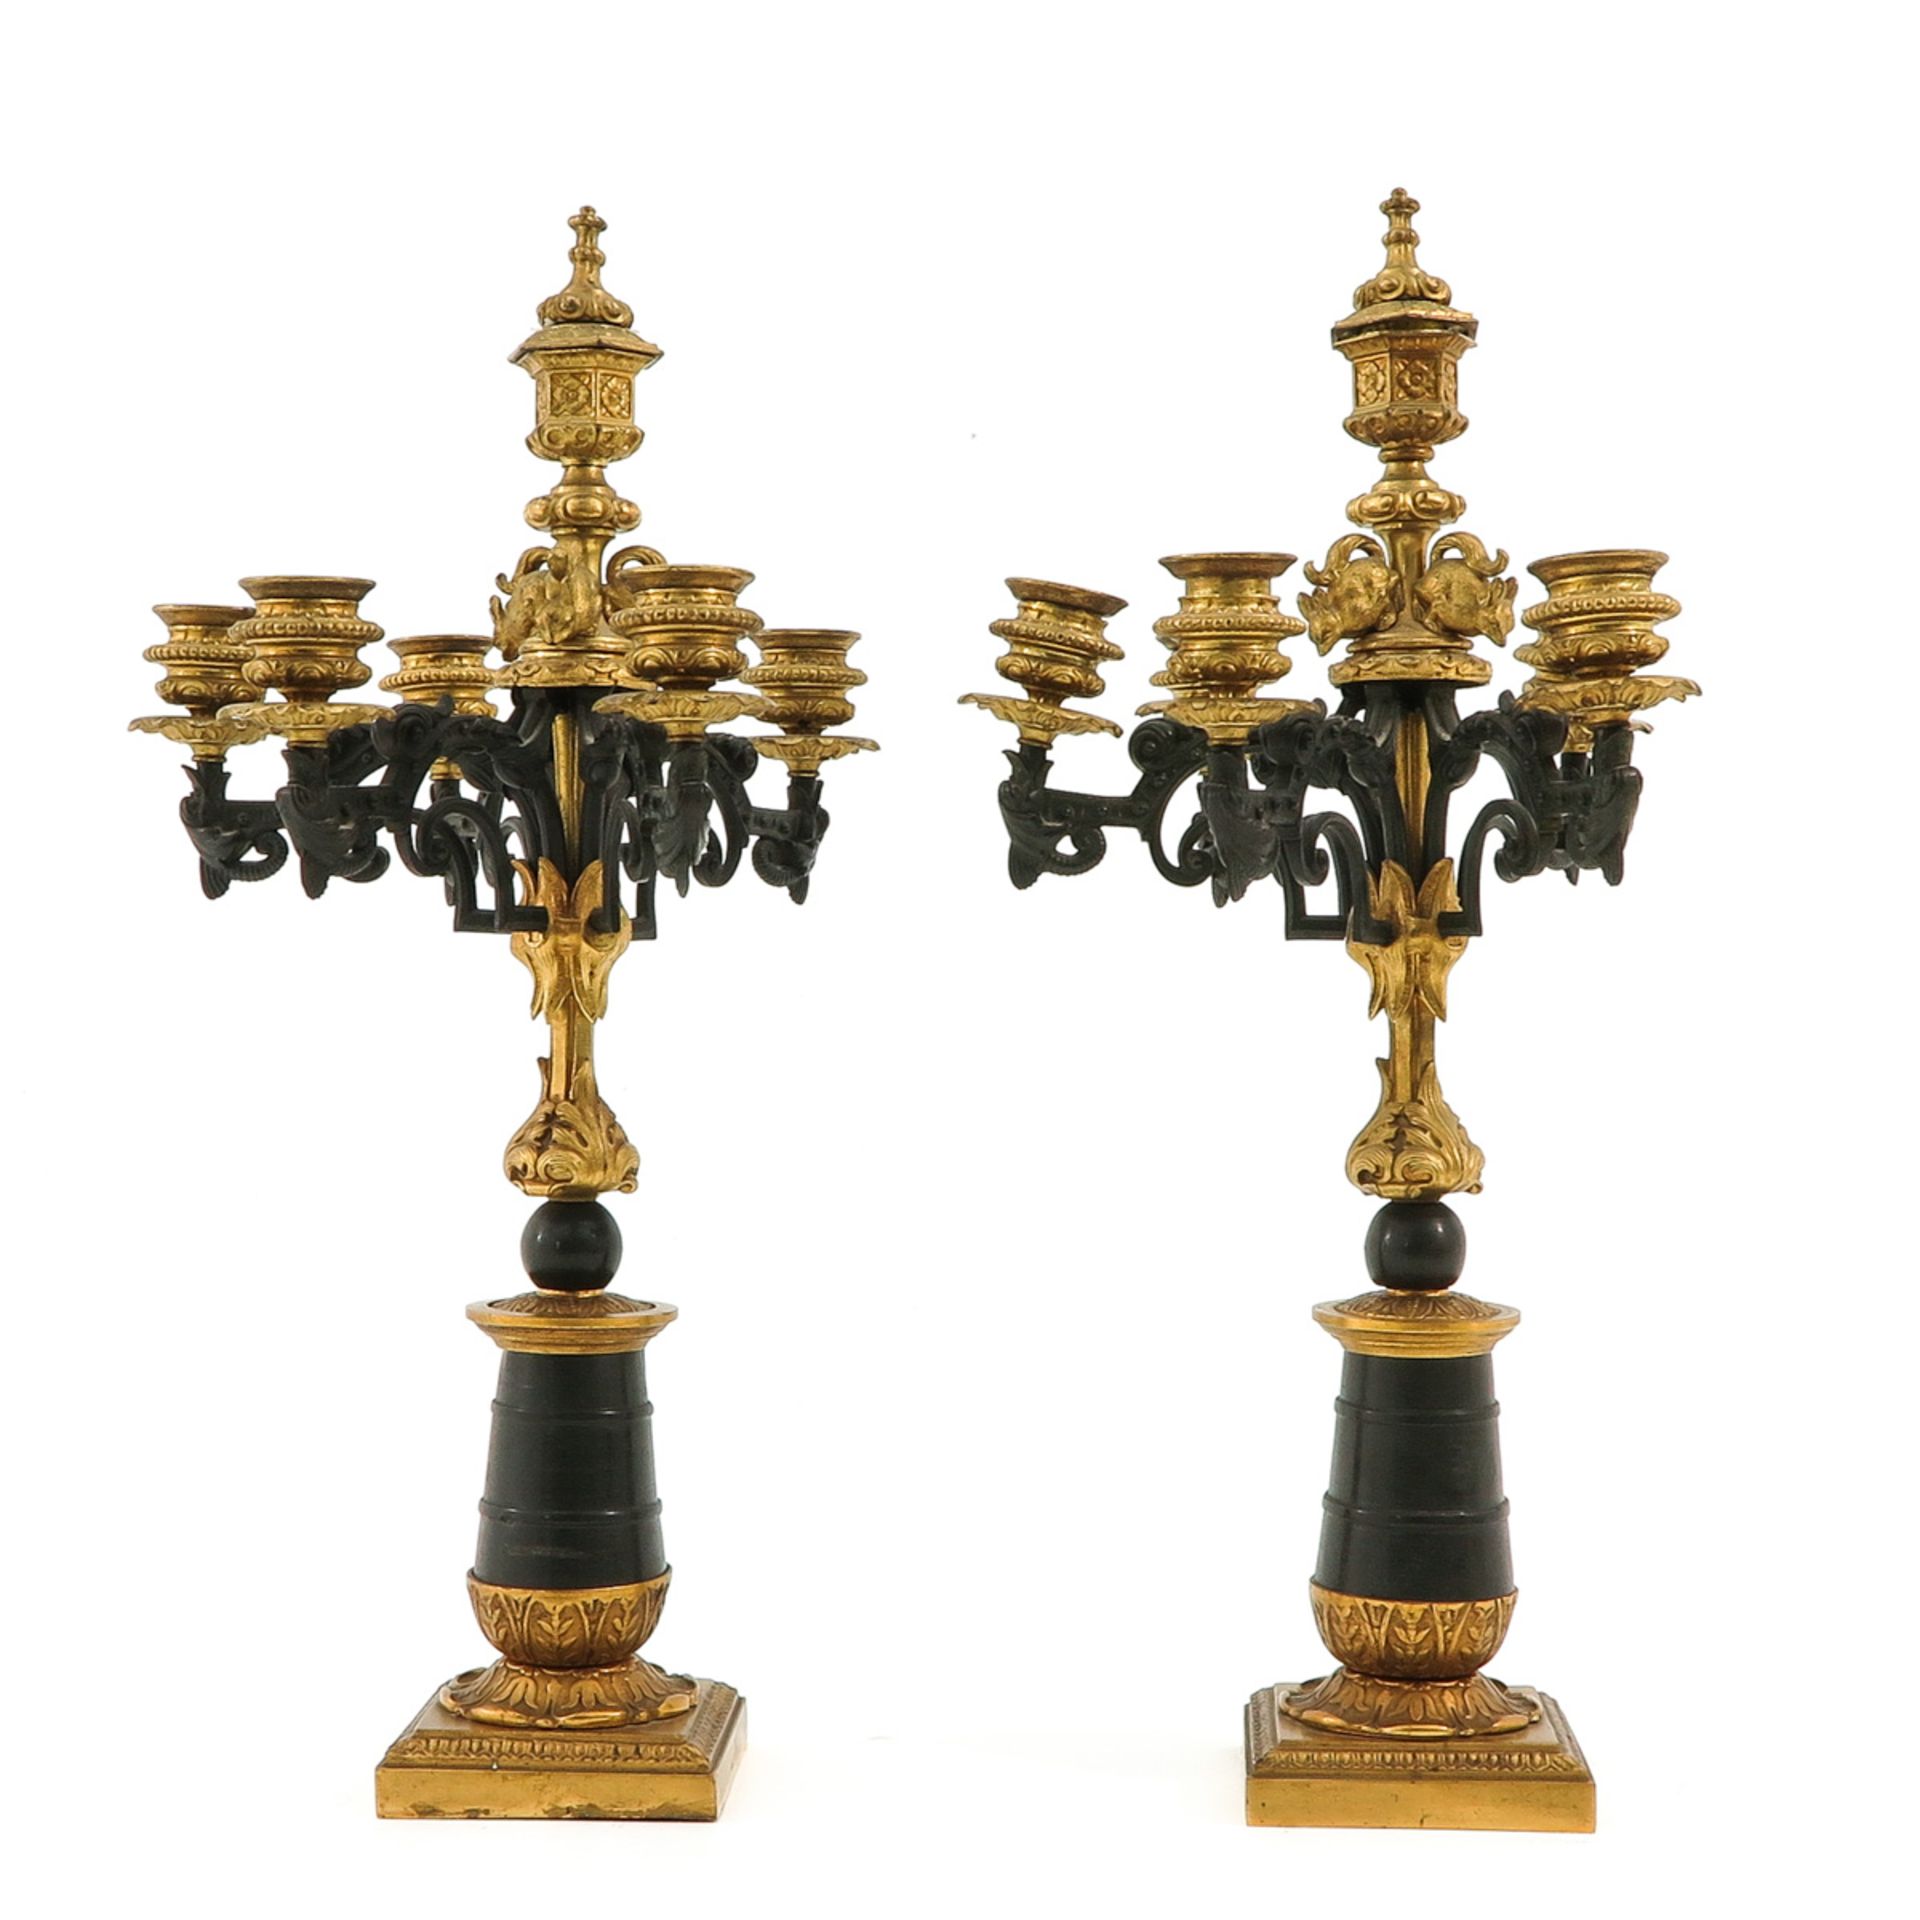 A Pair of Candlesticks - Image 2 of 6